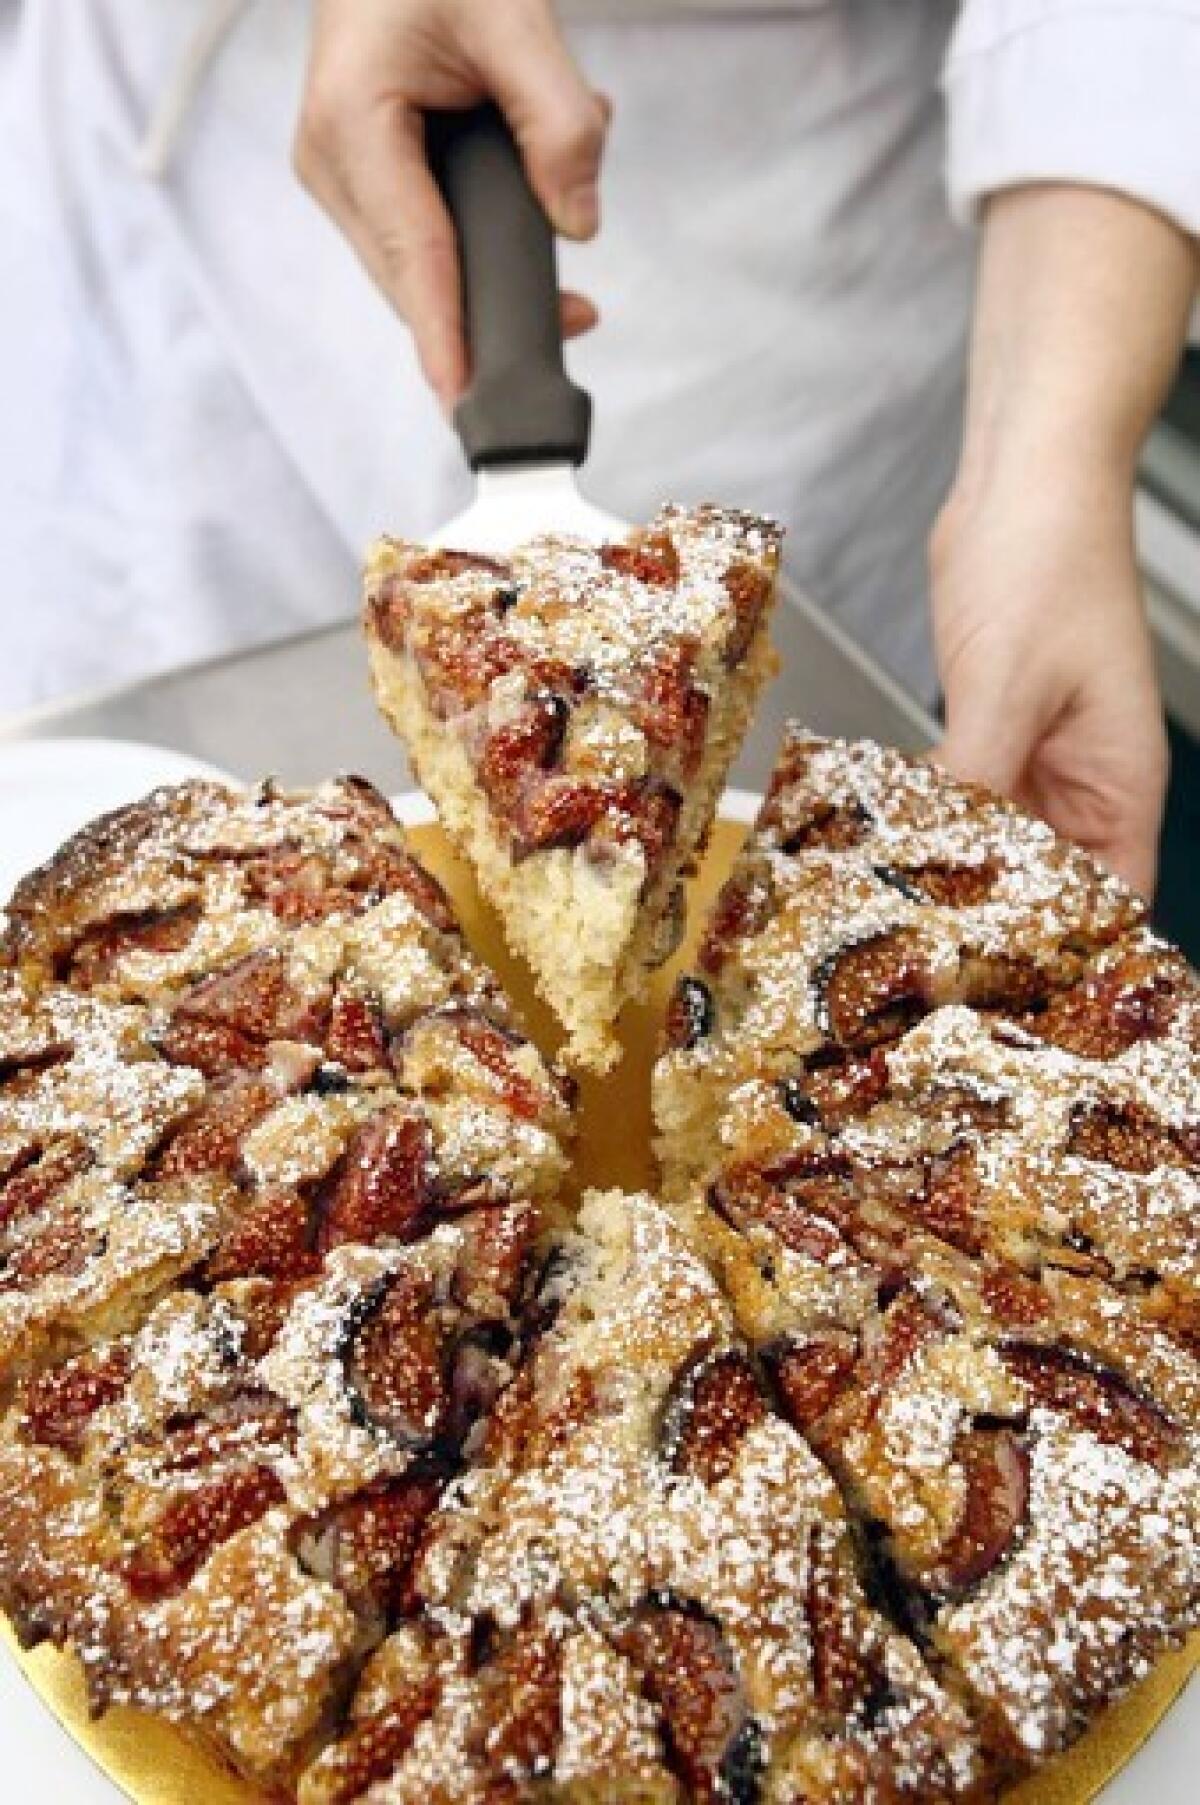 The rolled-oat cake with figs is sliced into servings at Proof Bakery in Atwater Village. Recipe